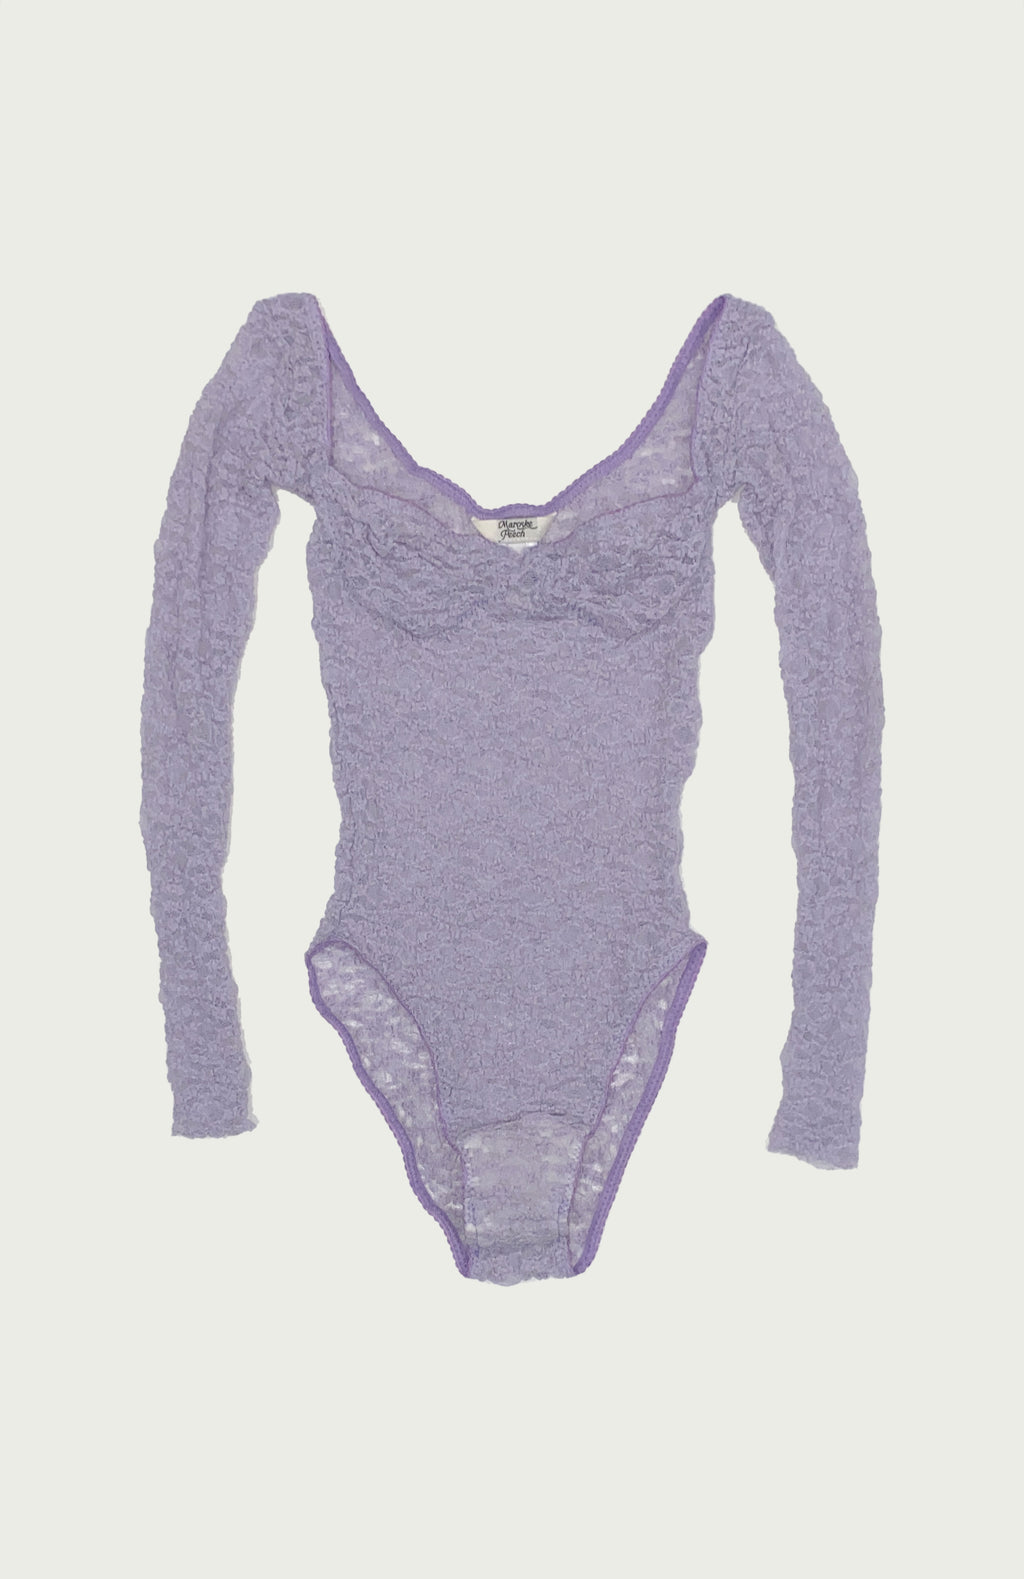 Maroske Peech A reprise of our signature stretch soft cup leotard in stunning lilac lace. Features a snap opening at gusset for ease wearer and zig-zag decorative stitching with a scalloped elastic detail.